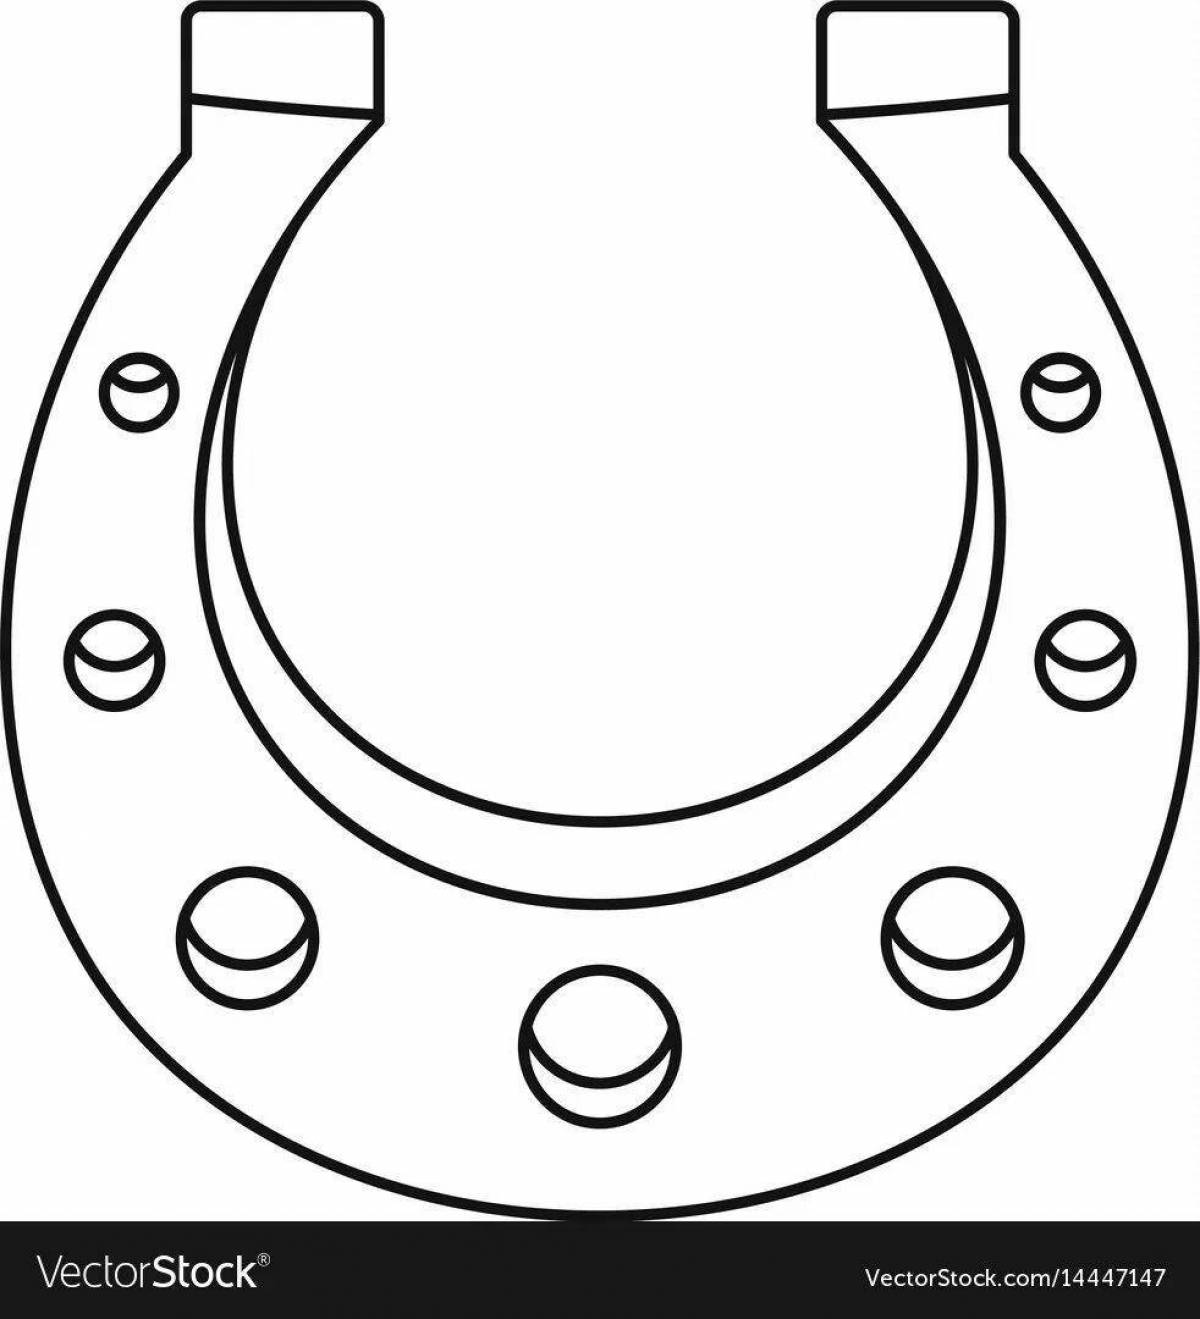 Awesome horseshoe coloring book for kids